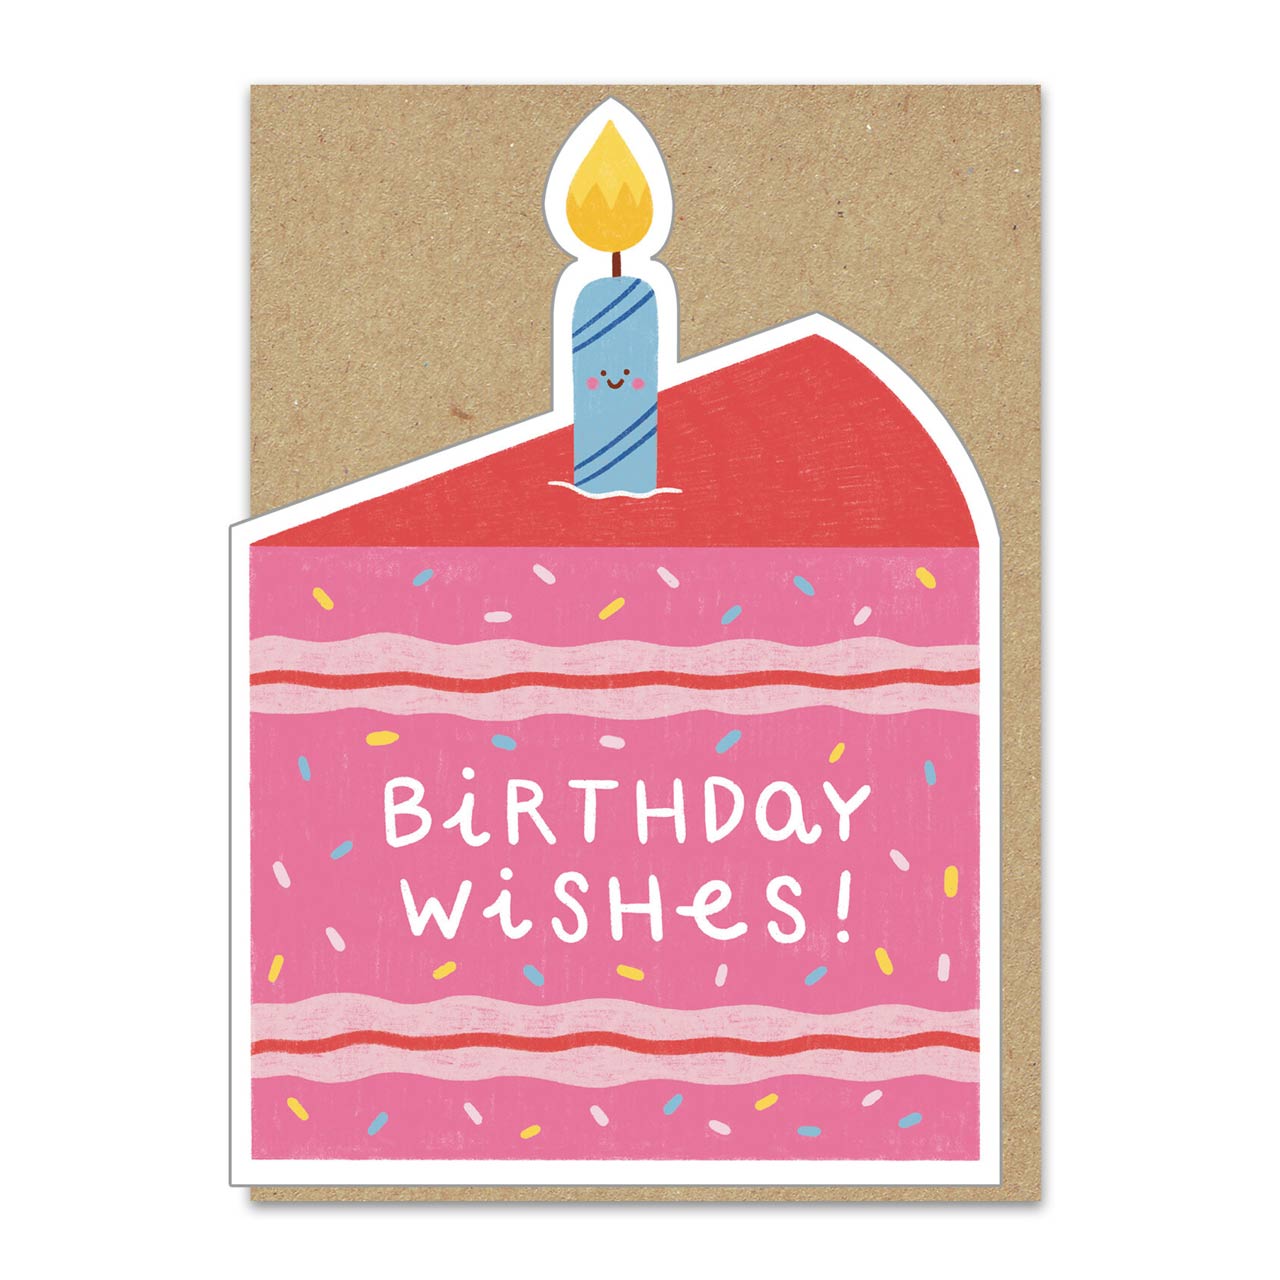 Slice of Cake Cut Out Greeting Card